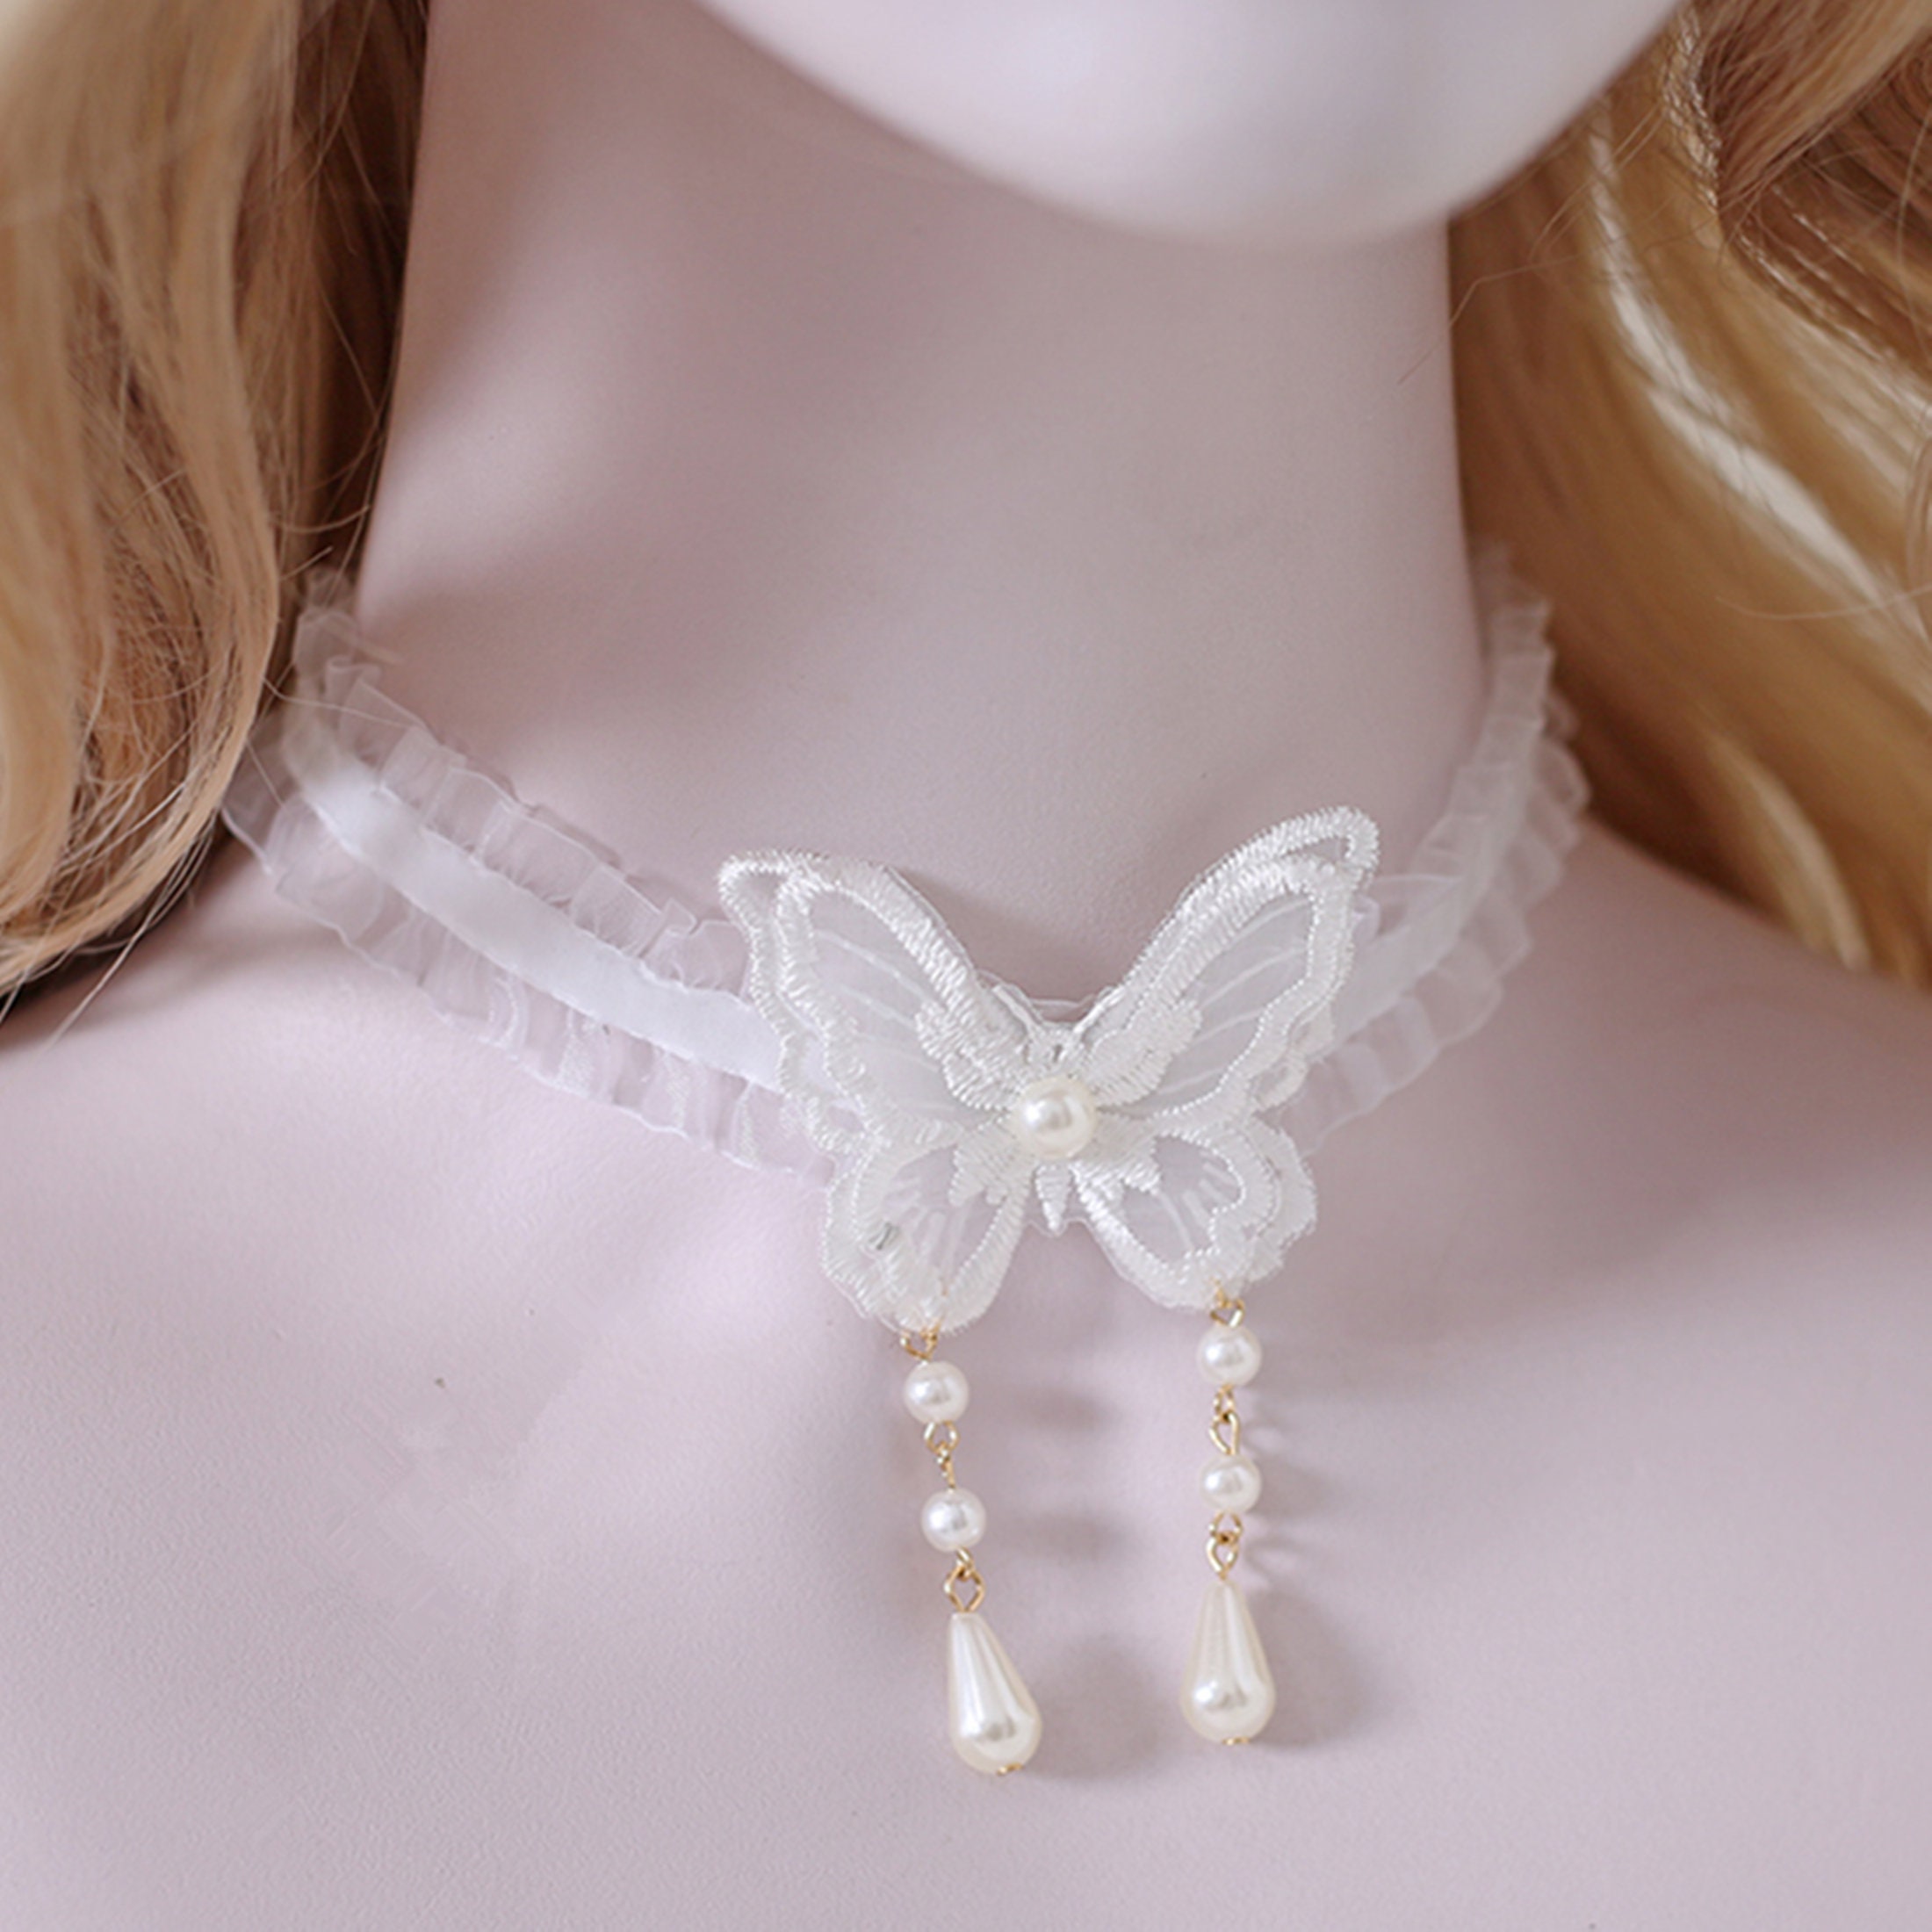 White Lace Choker Necklace - Retro Style Perfect Gift